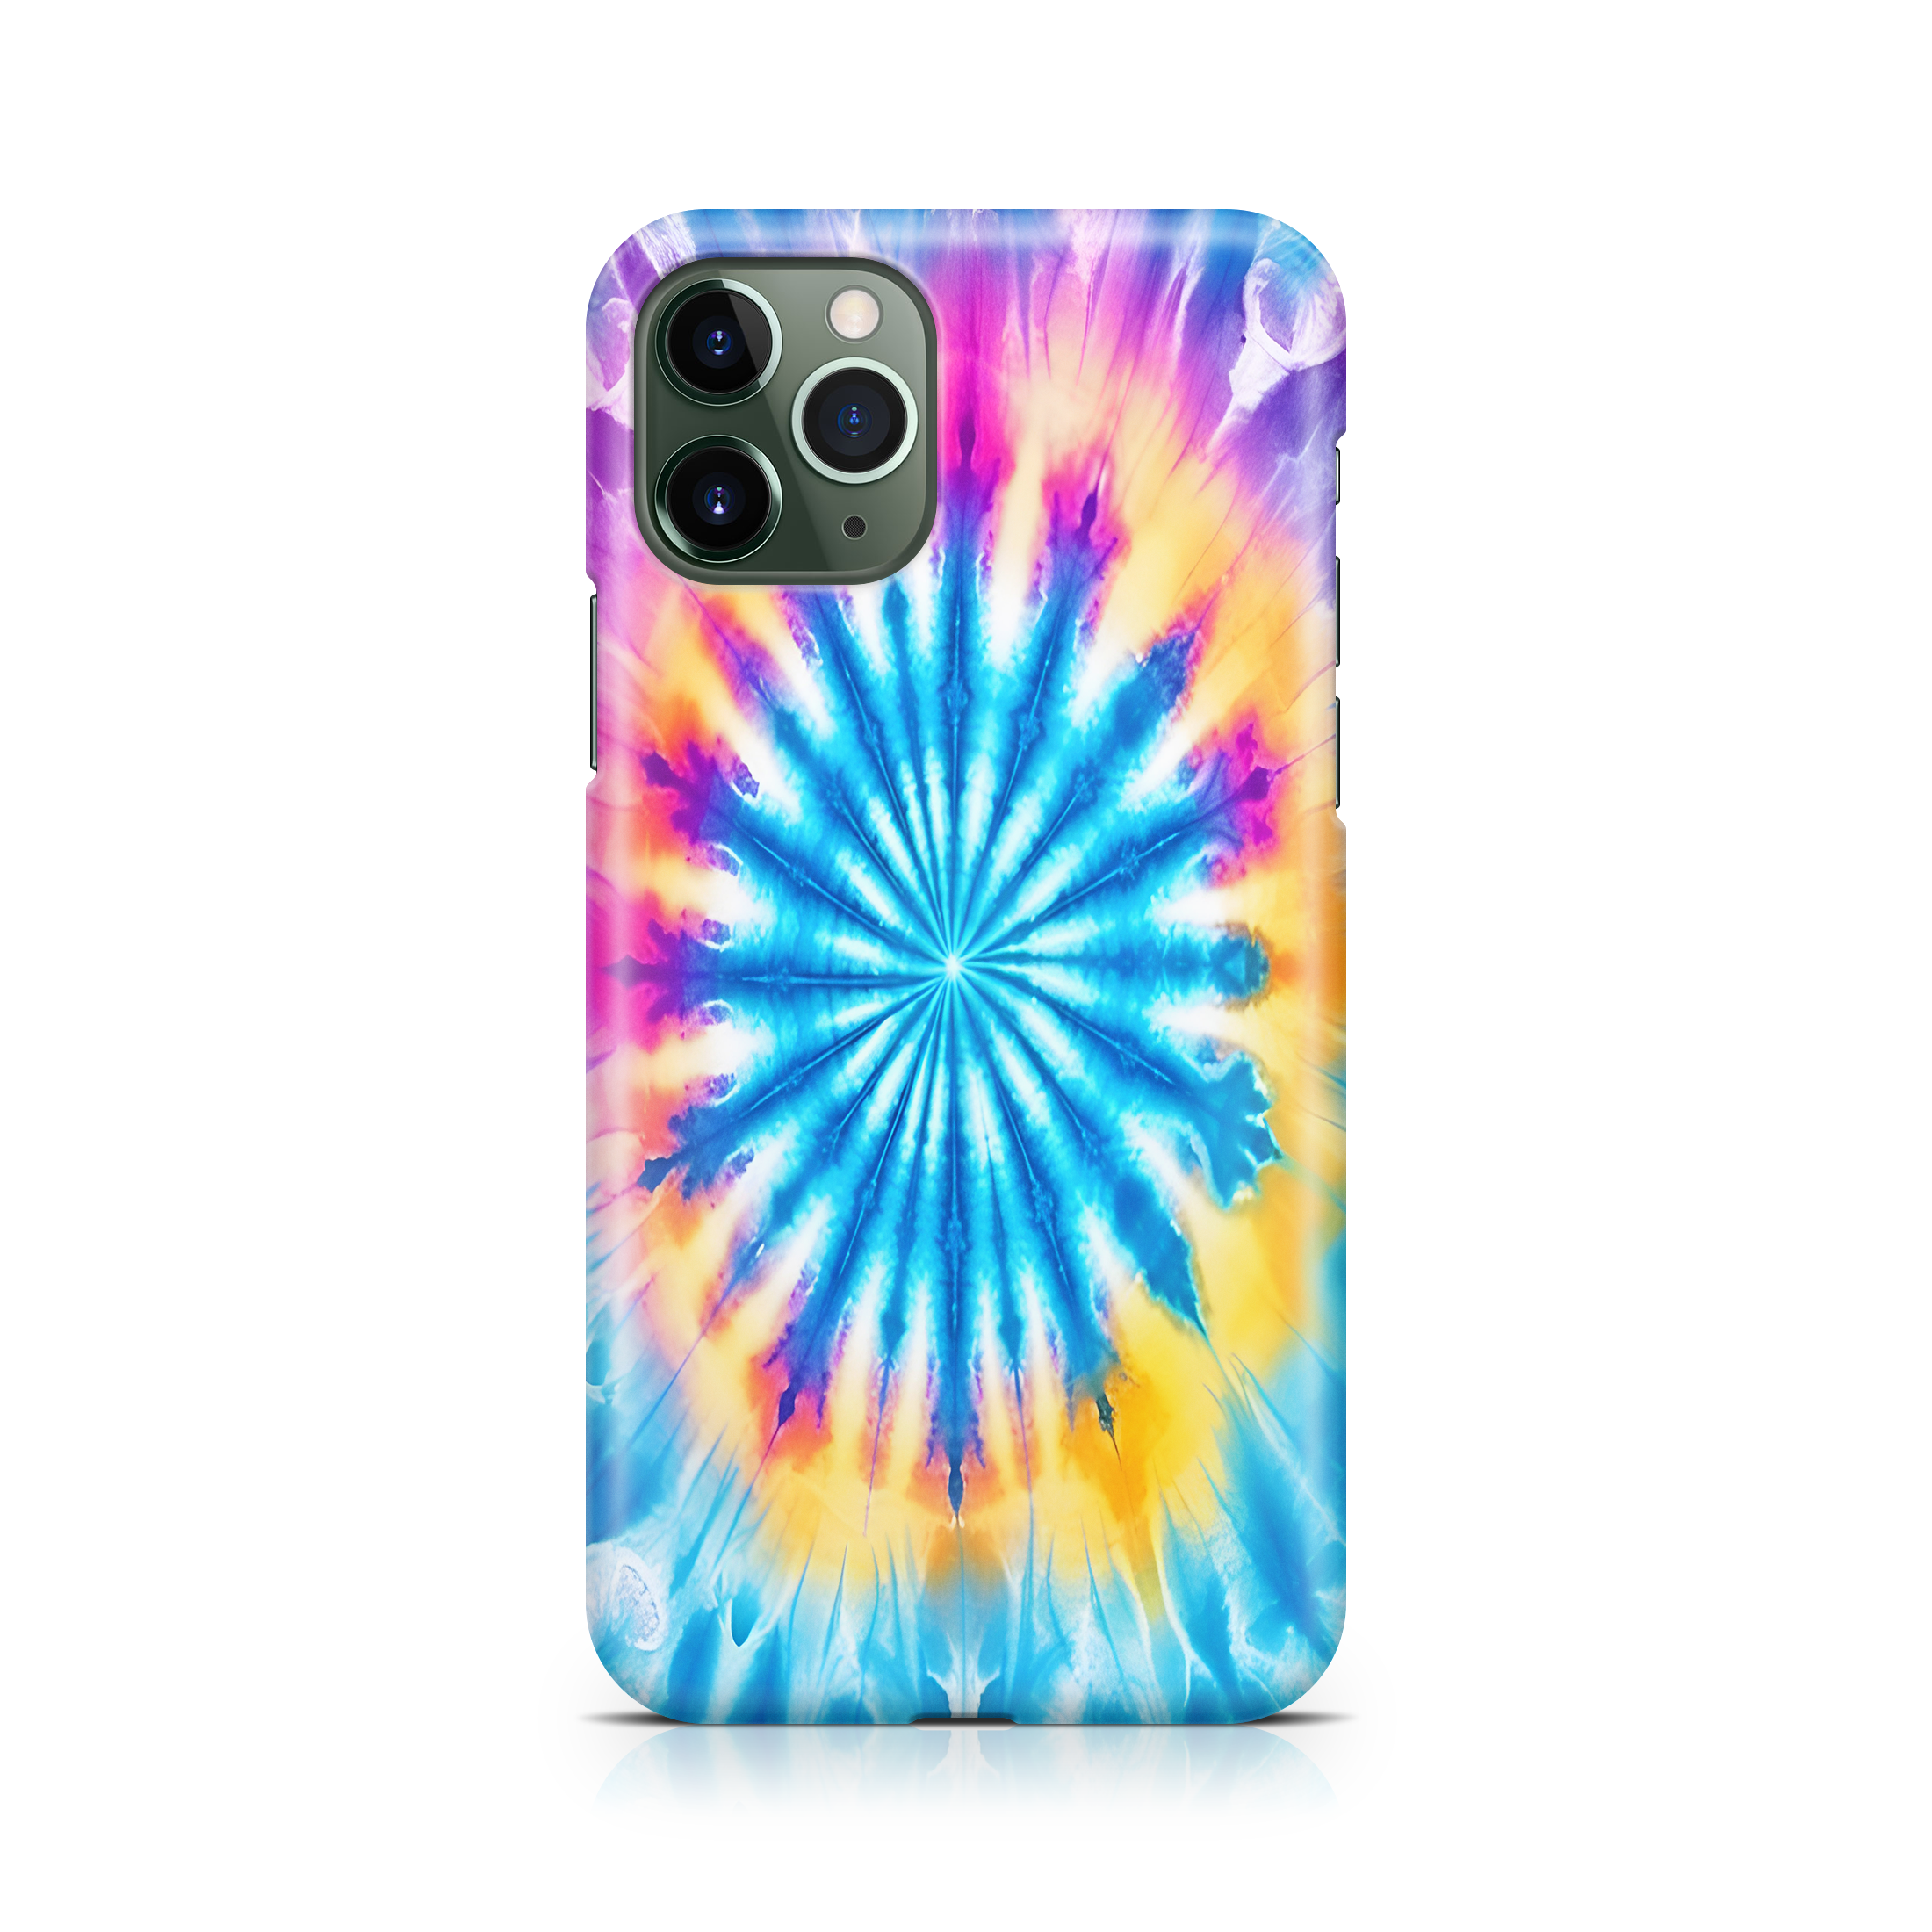 Hippie Tide - iPhone phone case designs by CaseSwagger